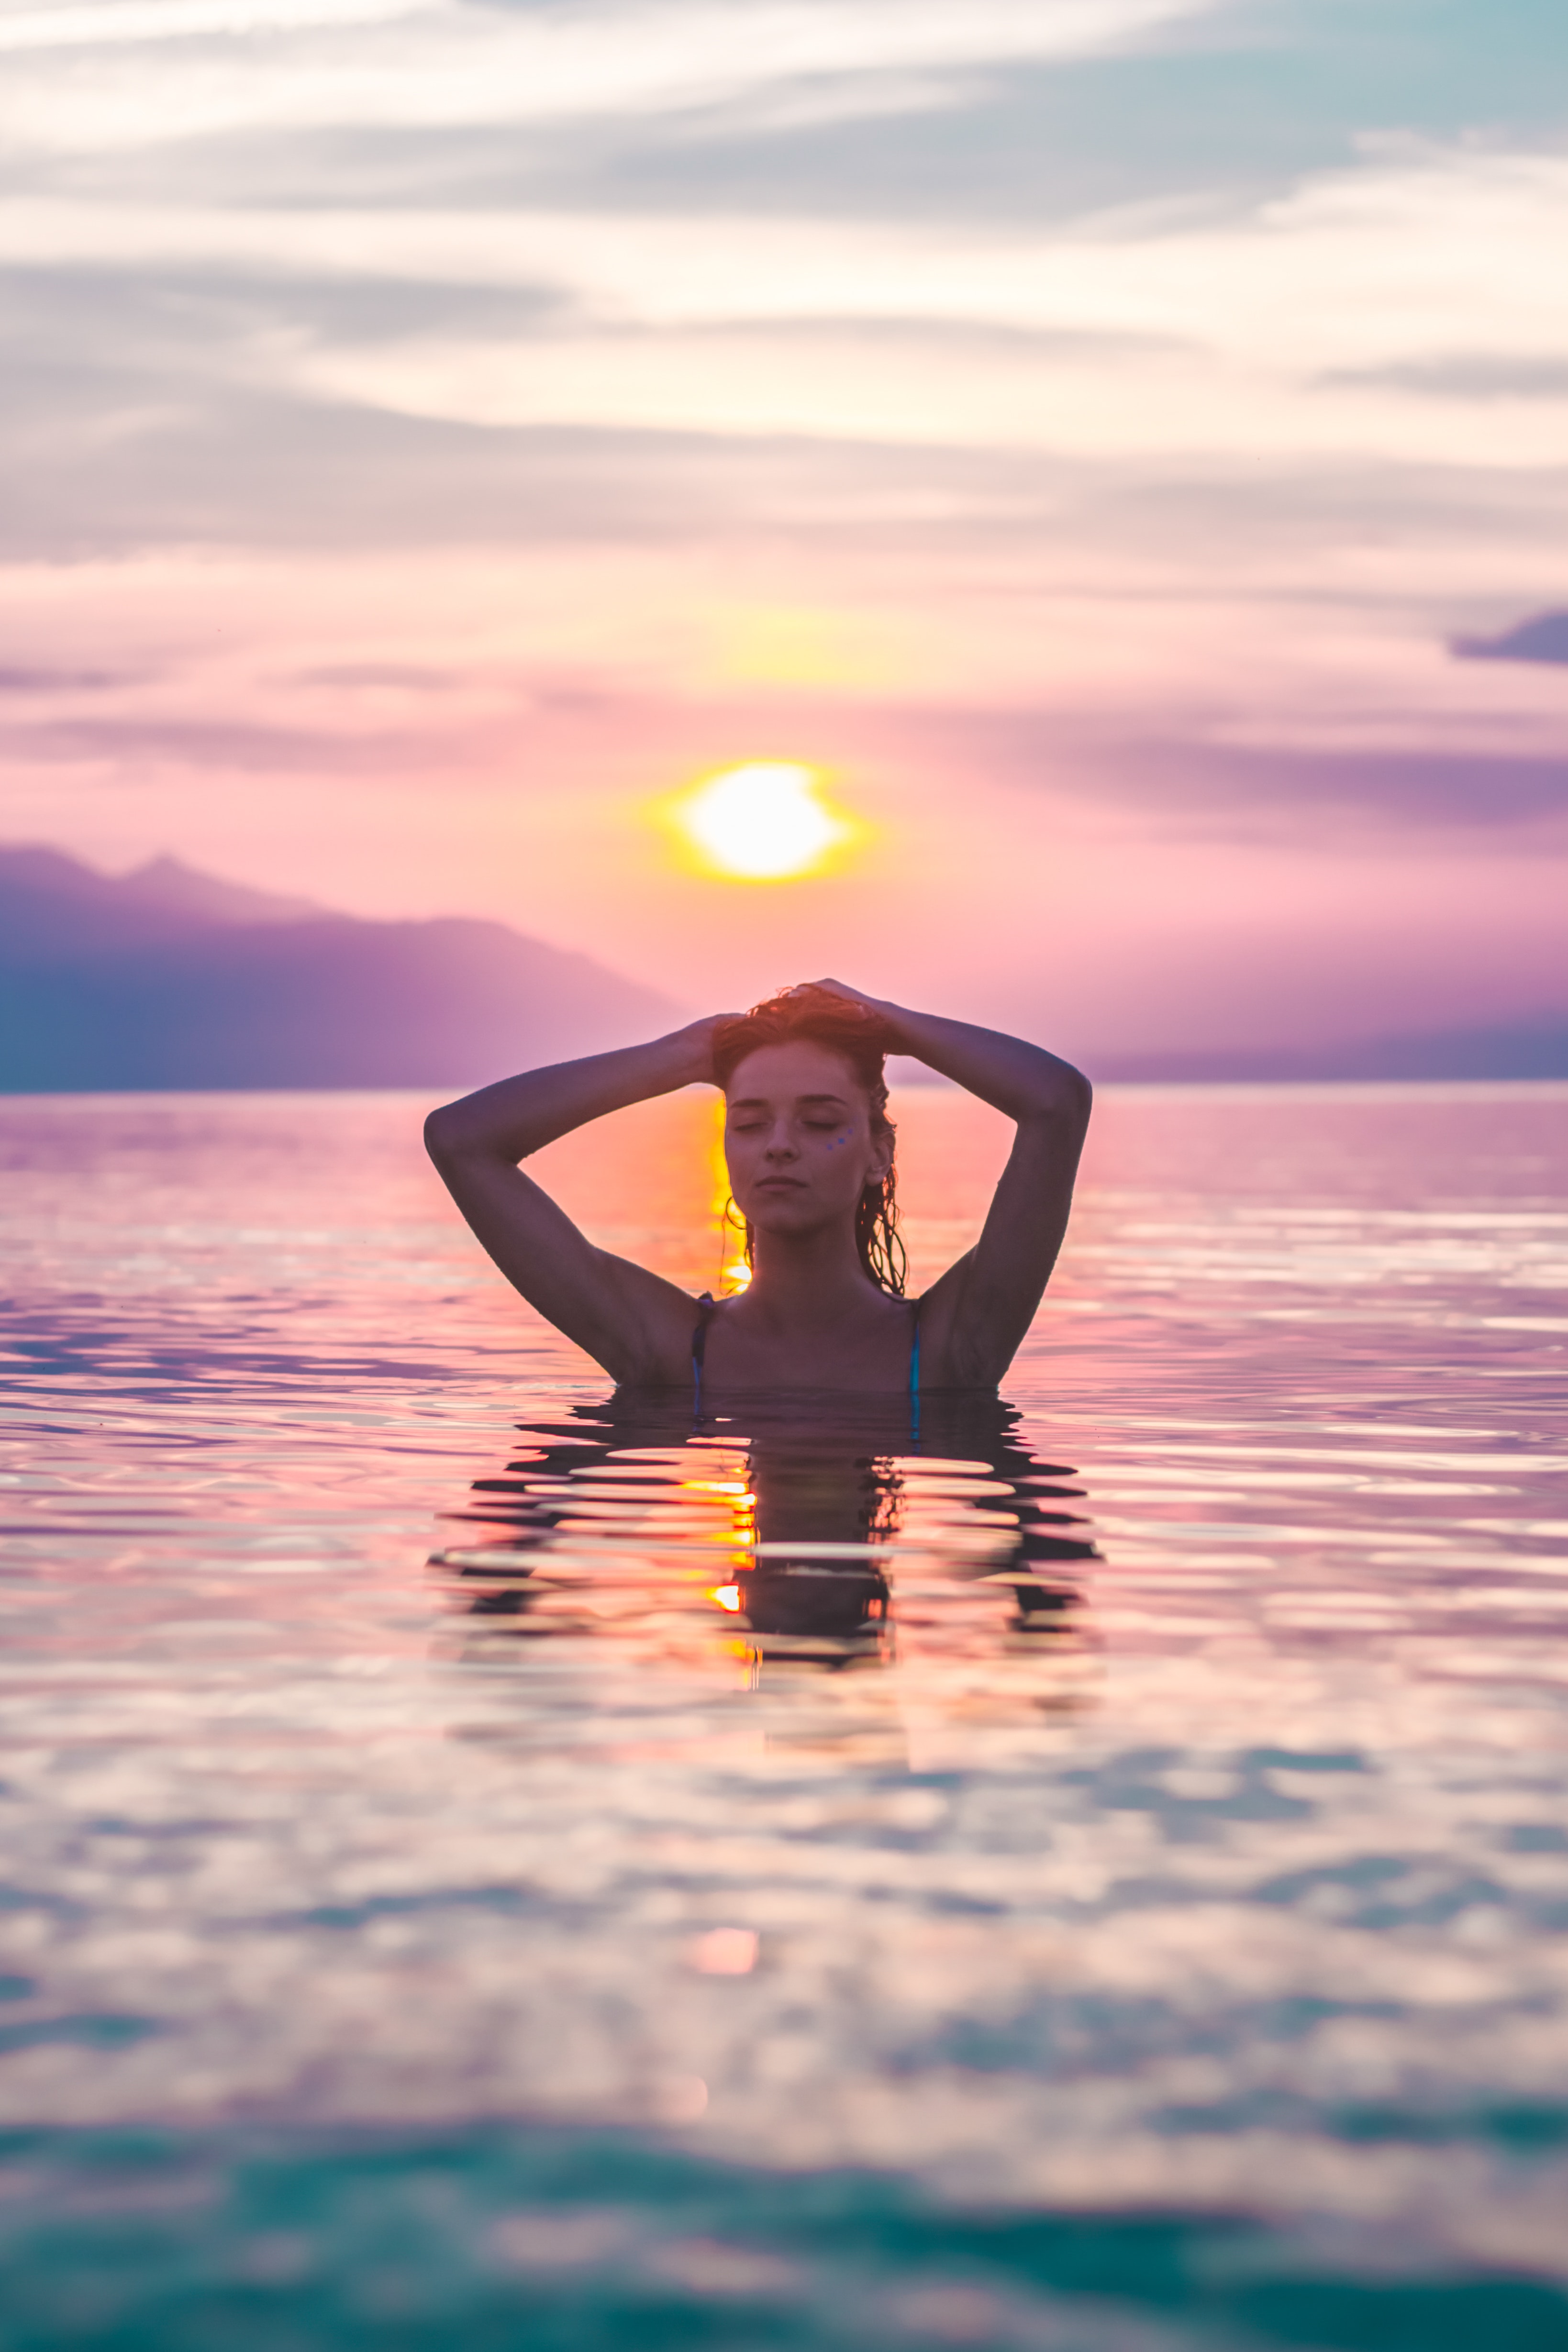 Selective Focus Photo of a Woman Bathing in Body of Water during Golden Hour, Beach, Relaxation, Water, Vacation, HQ Photo